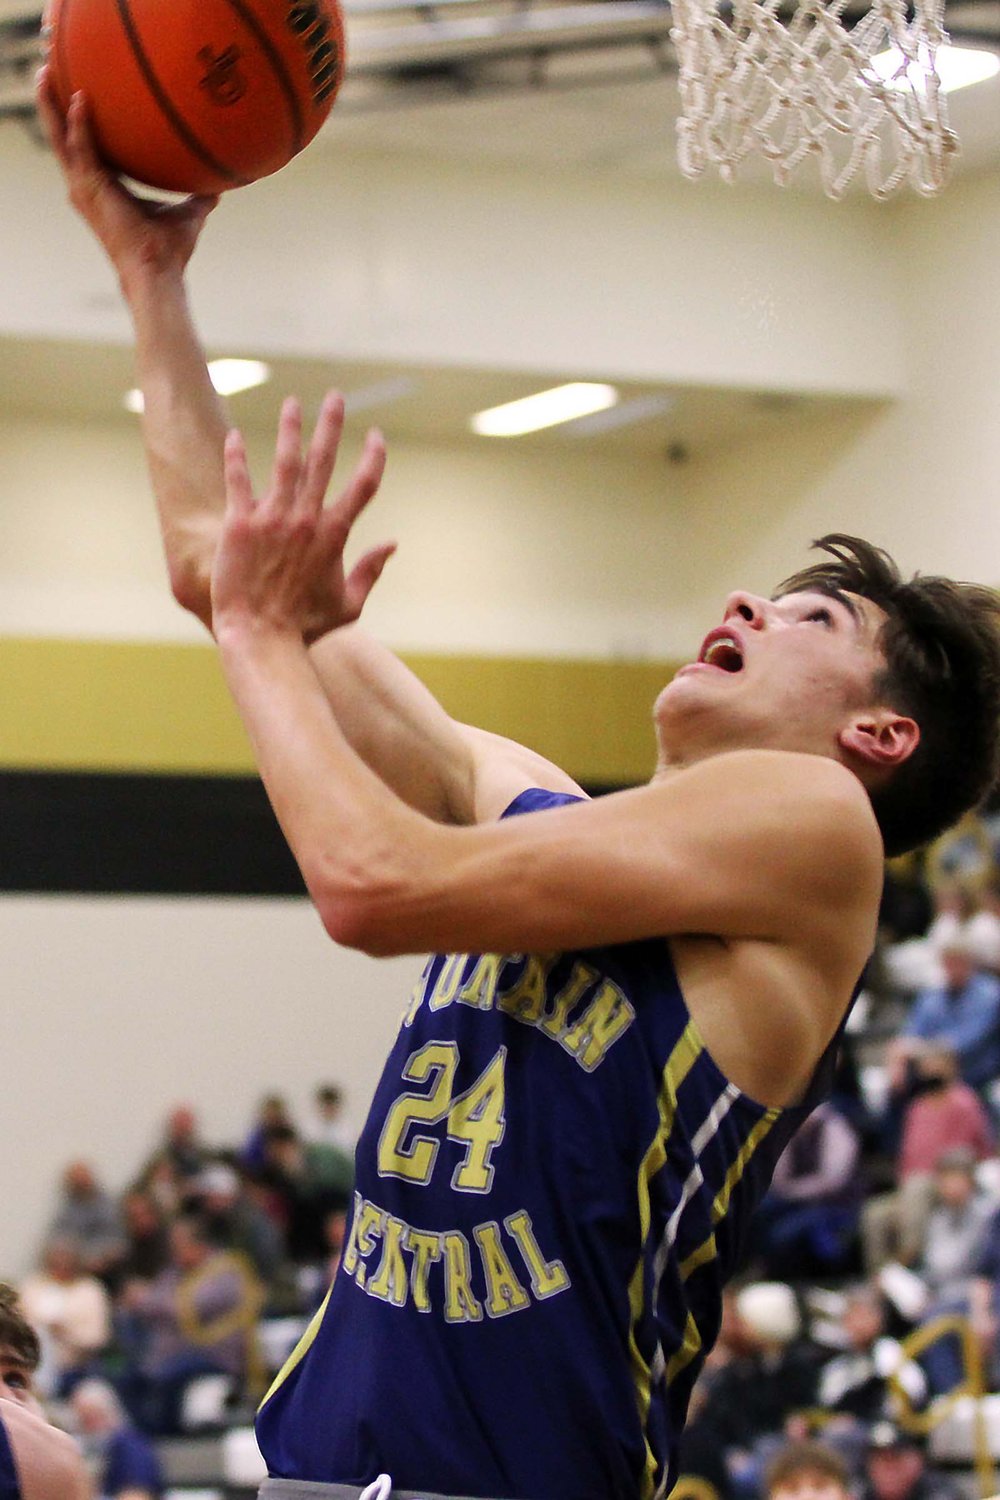 Isaac Gyler of Fountain Central scoops a reverse lay-up in the first quarter against Covington.